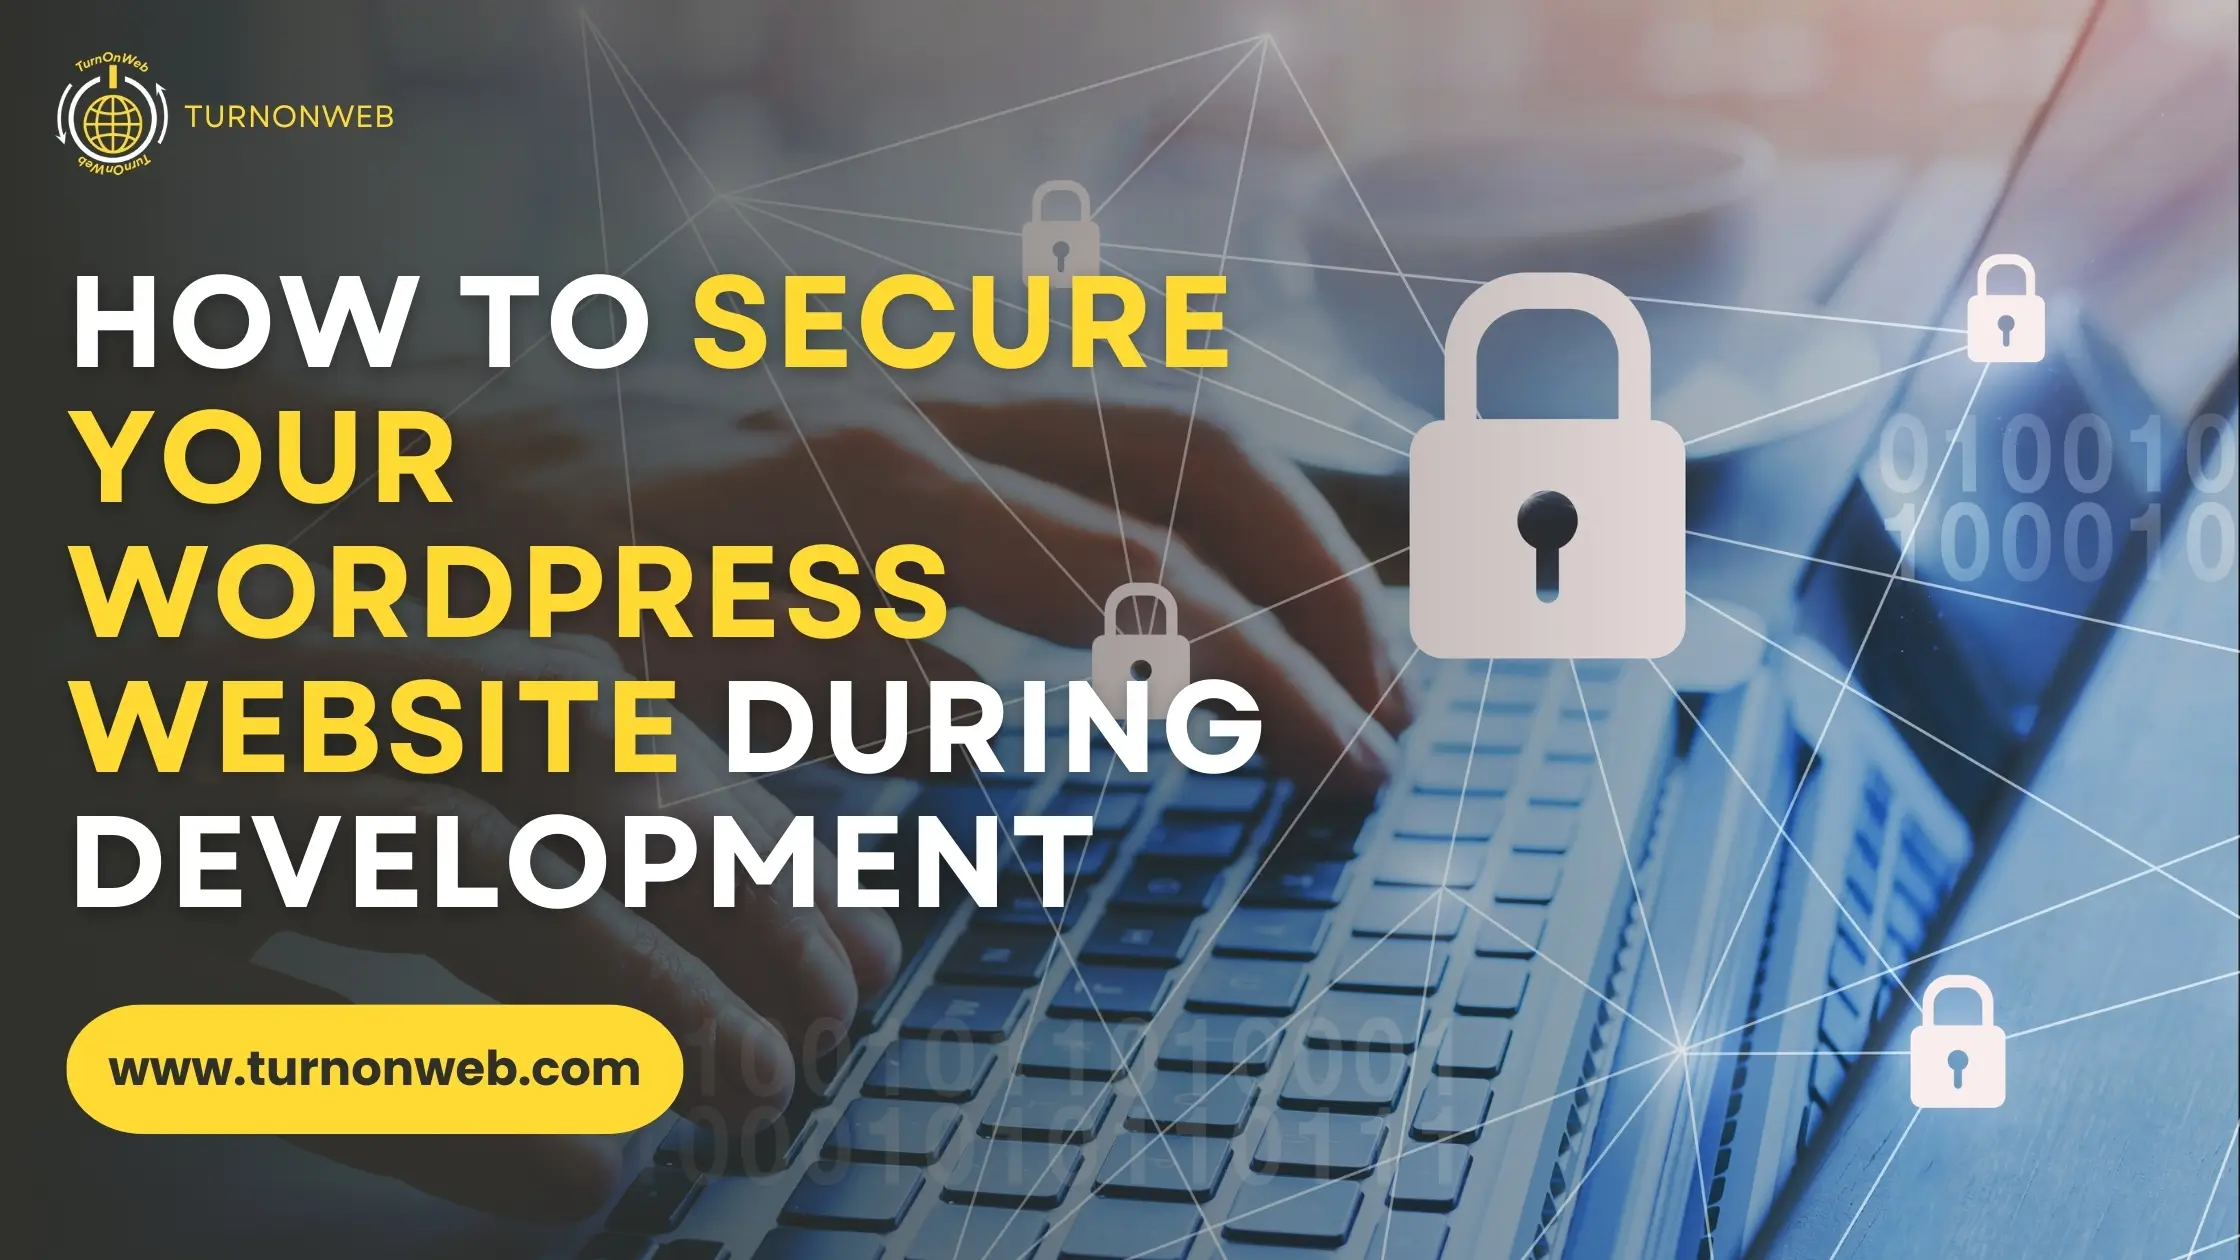 How to Secure Your WordPress Website During Development